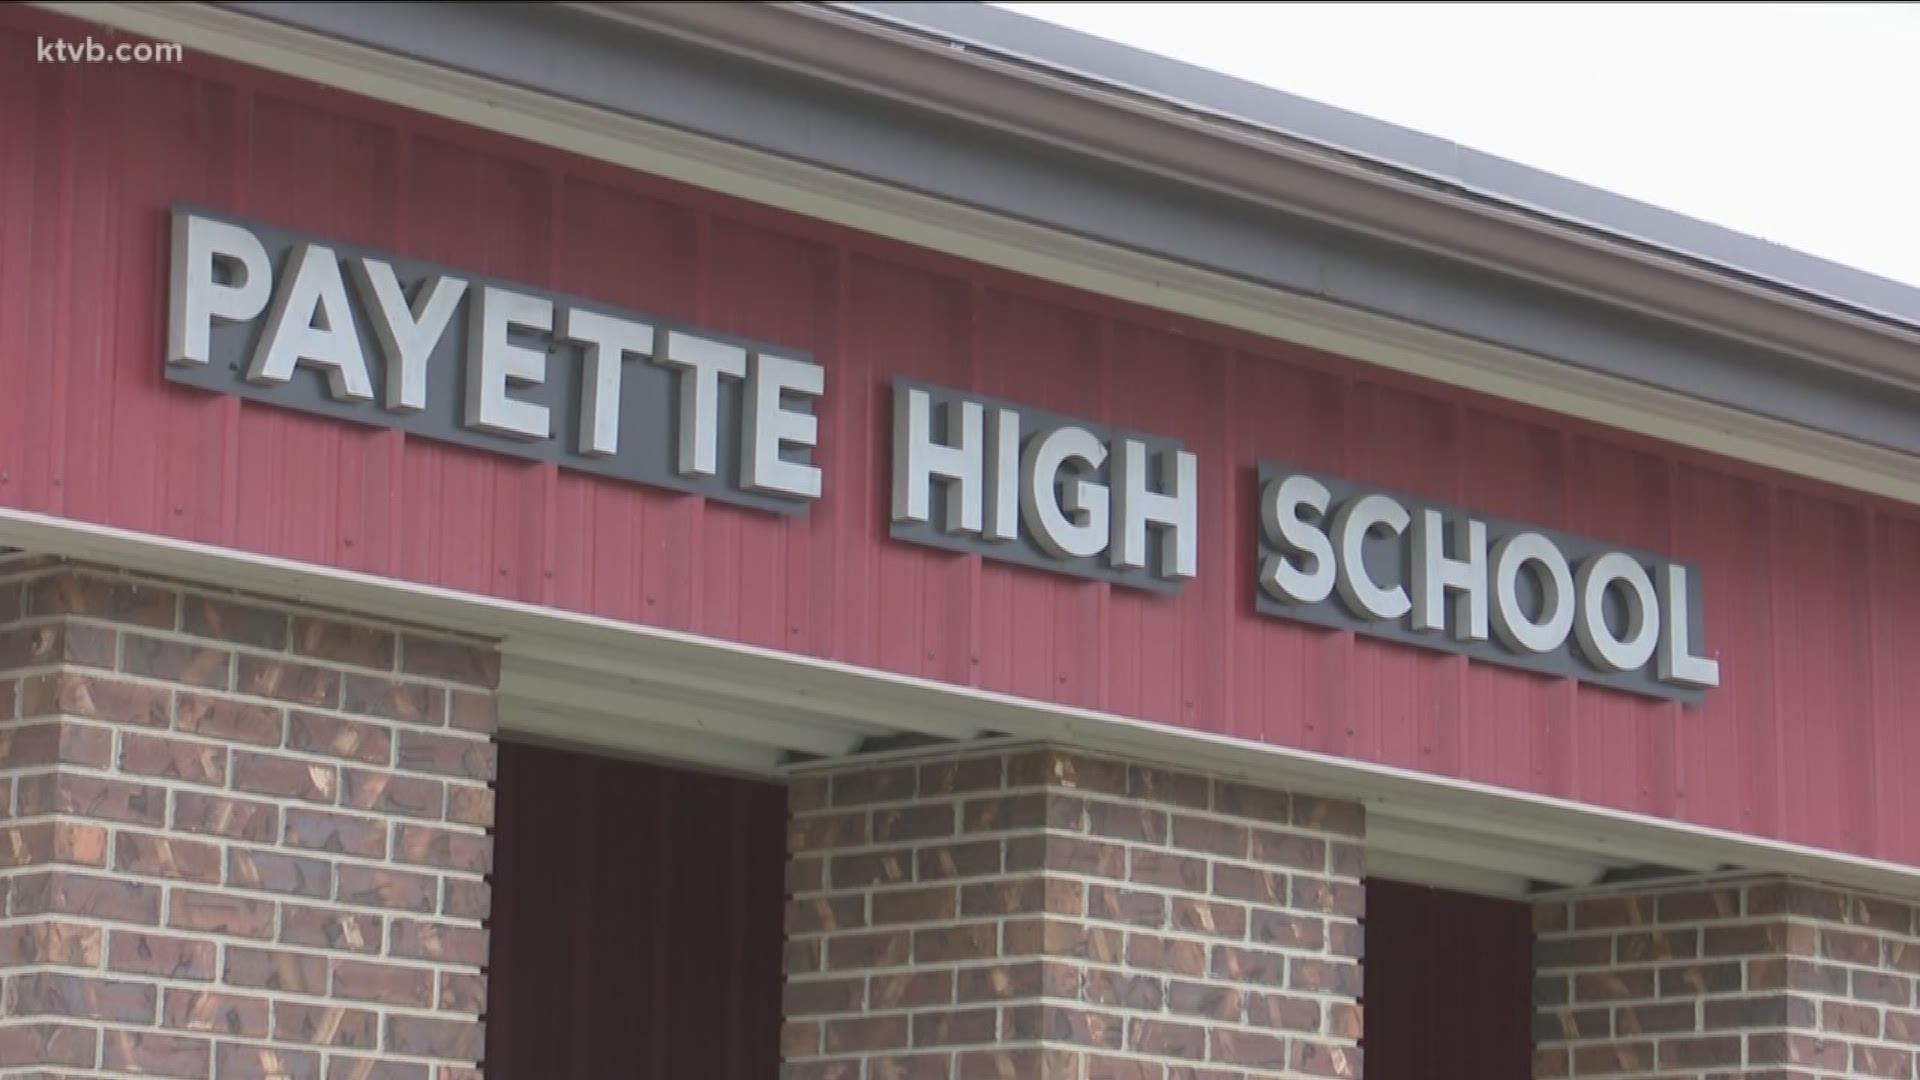 District officials are now trying to figure out what to do next as they try to secure funding for Payette's aging high school.